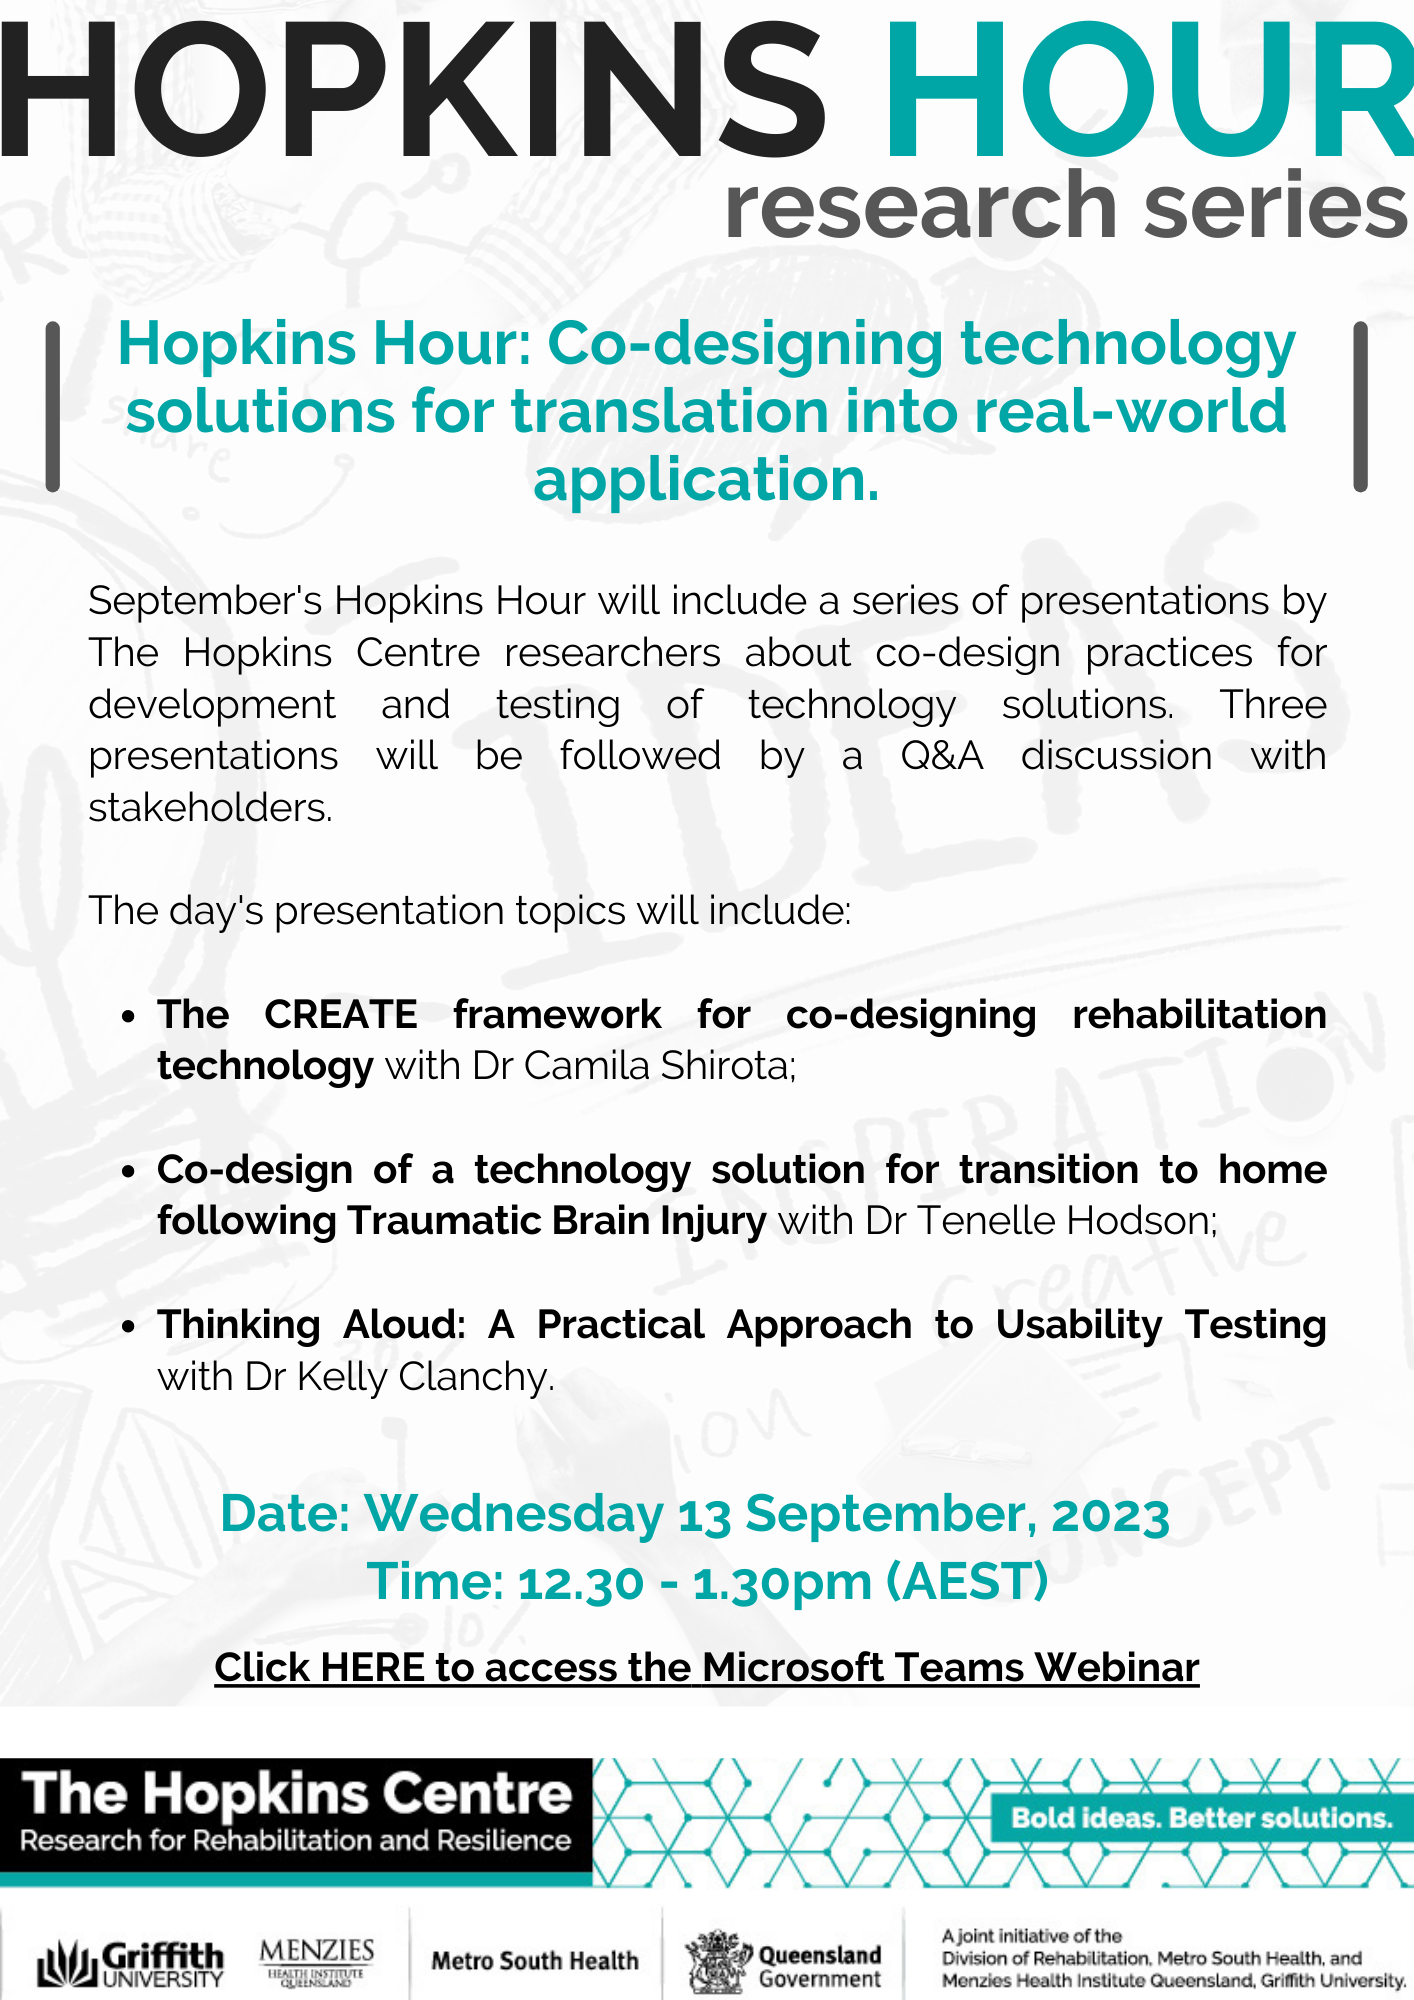 Hopkins Hour poster: a white background with watermarked words, symbols and lines. The The title of this event is in turquoise underneath the title Hopkins Hour Research Series which sits at the top of the page in bold. There is information about the session in the middle of the poster and the Hopkins Centre logos at the bottom. The entire page is in the black and turquoise colour scheme. The link to the event is also listed: https://teams.microsoft.com/l/meetup-join/19%3ameeting_NTI4NjVjZTctMDhhOS00OTJiLThjNjAtYjIwNzRlNTkwYmQx%40thread.v2/0?context=%7B%22Tid%22%3A%225a7cc8ab-a4dc-4f9b-bf60-66714049ad62%22%2C%22Oid%22%3A%22634c6c41-3200-43a6-b4dc-d60c0689f85a%22%7D